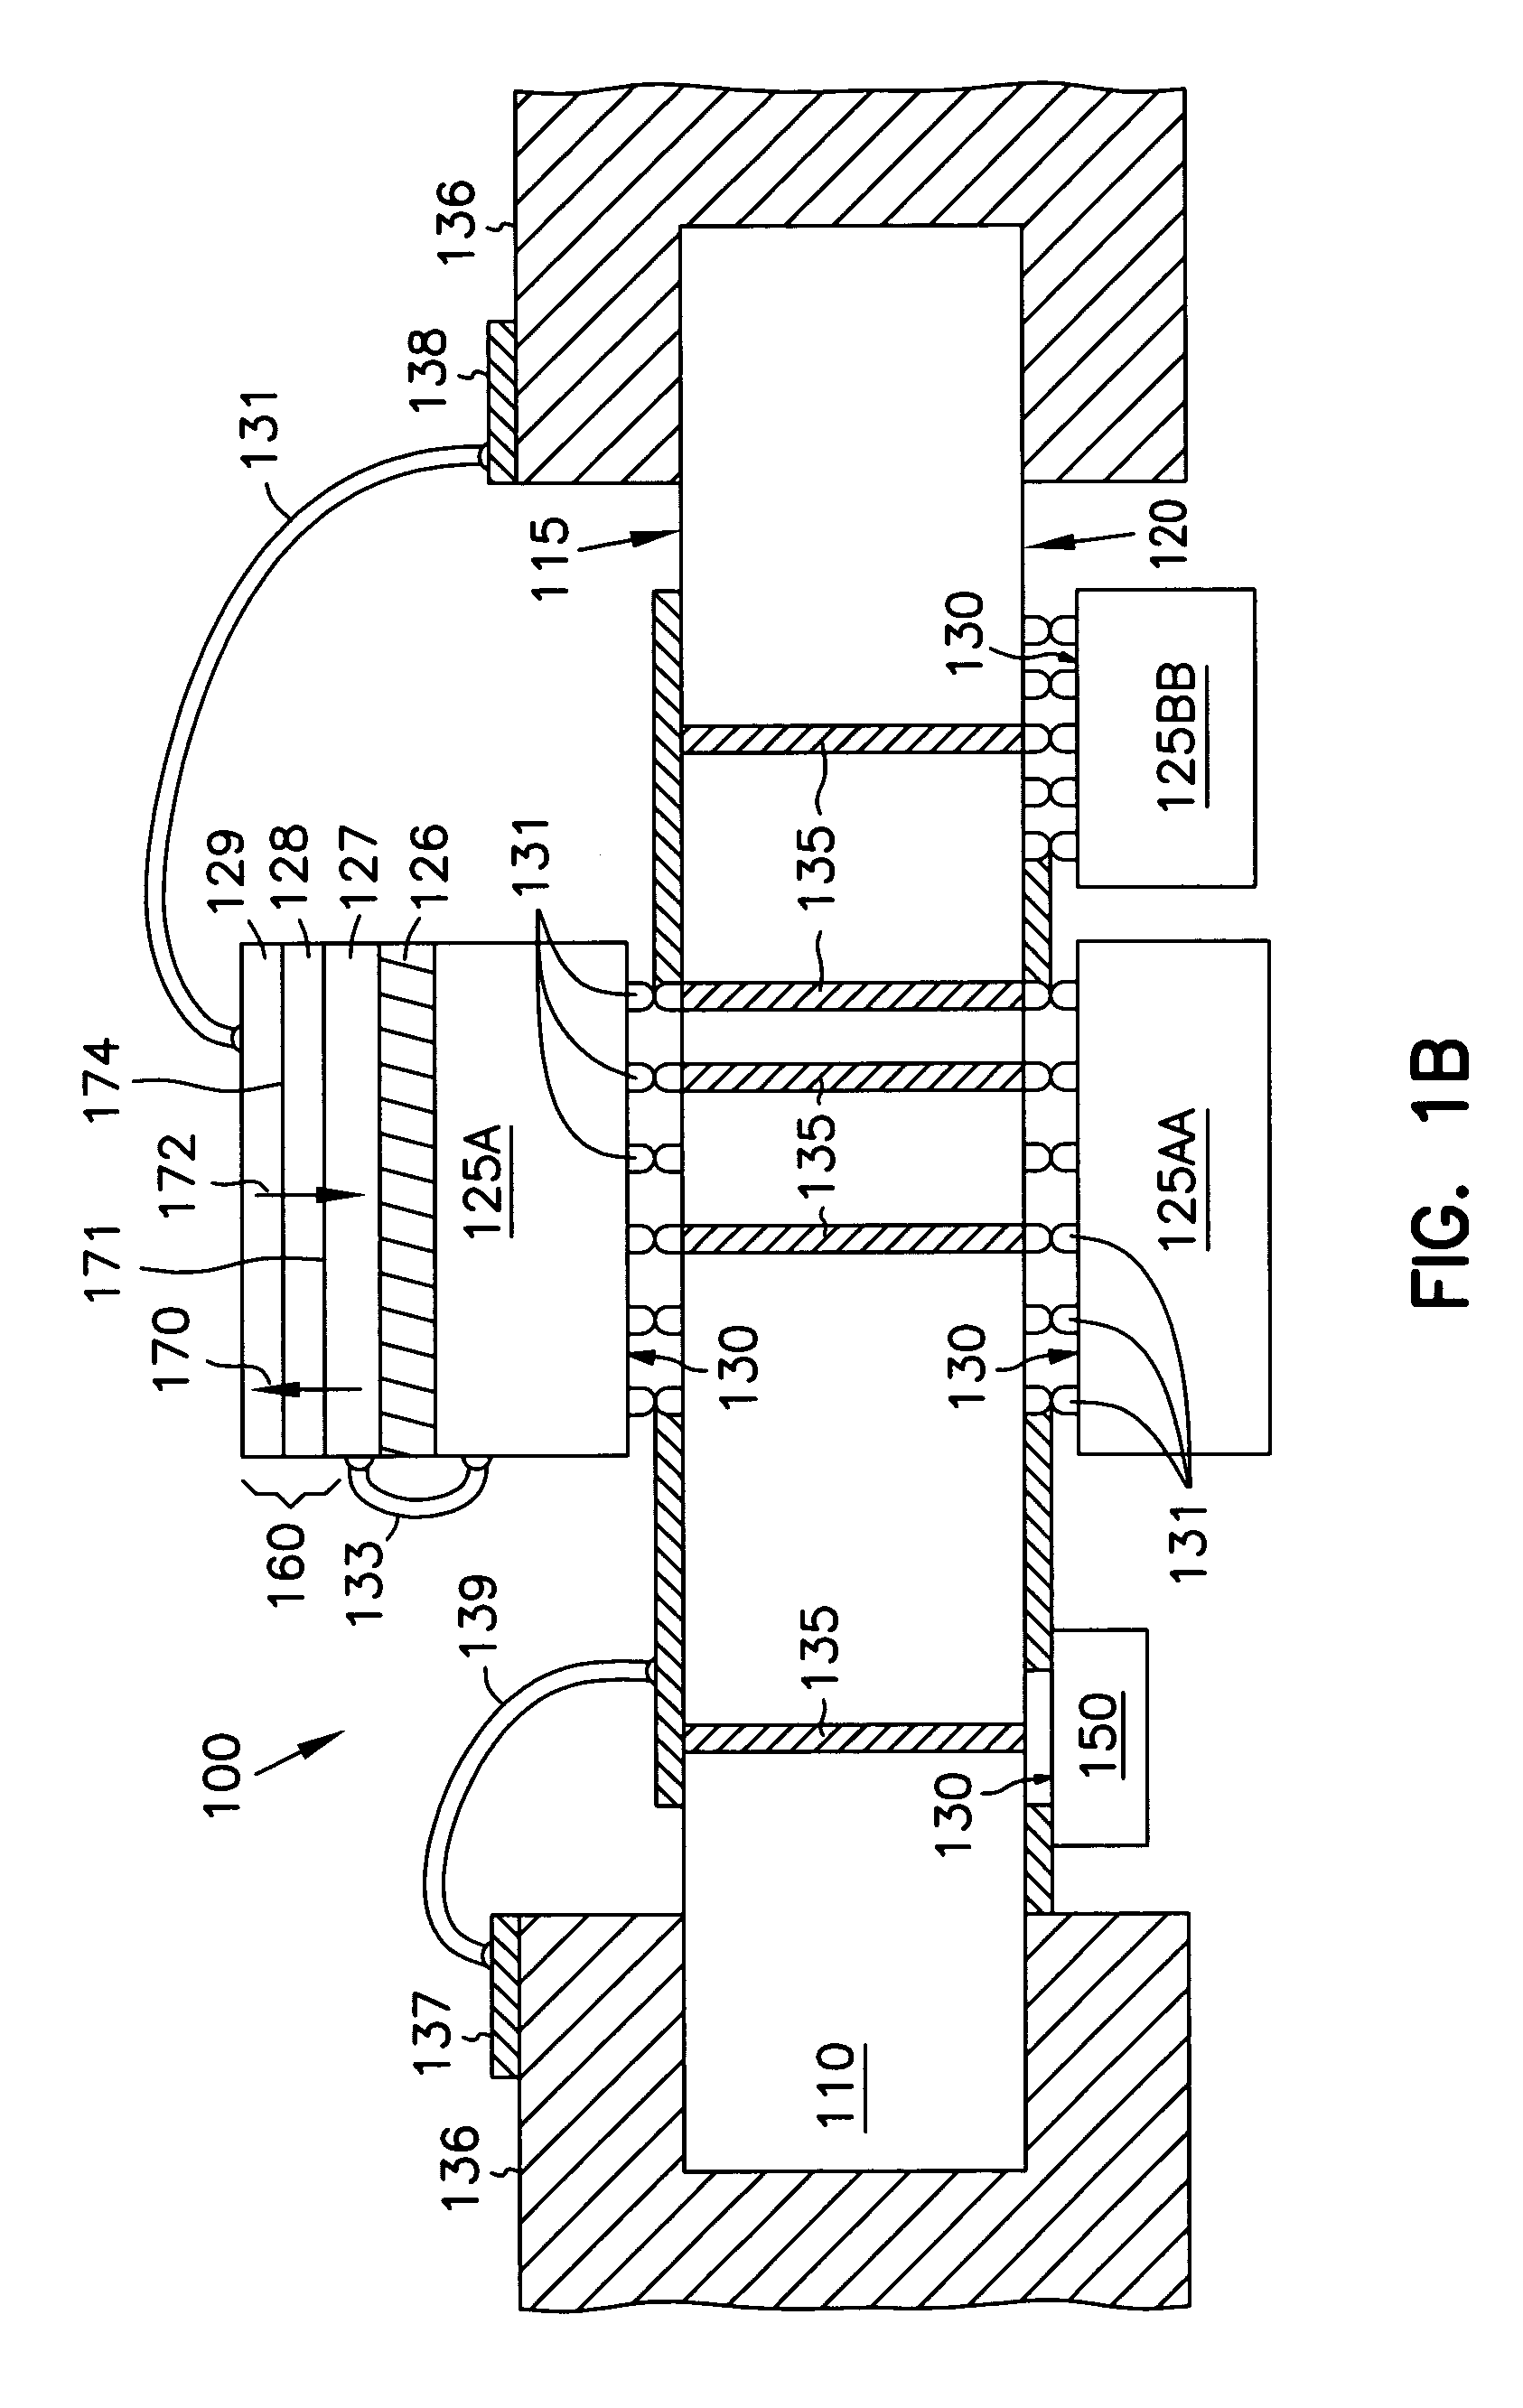 Compact system module with built-in thermoelectric cooling